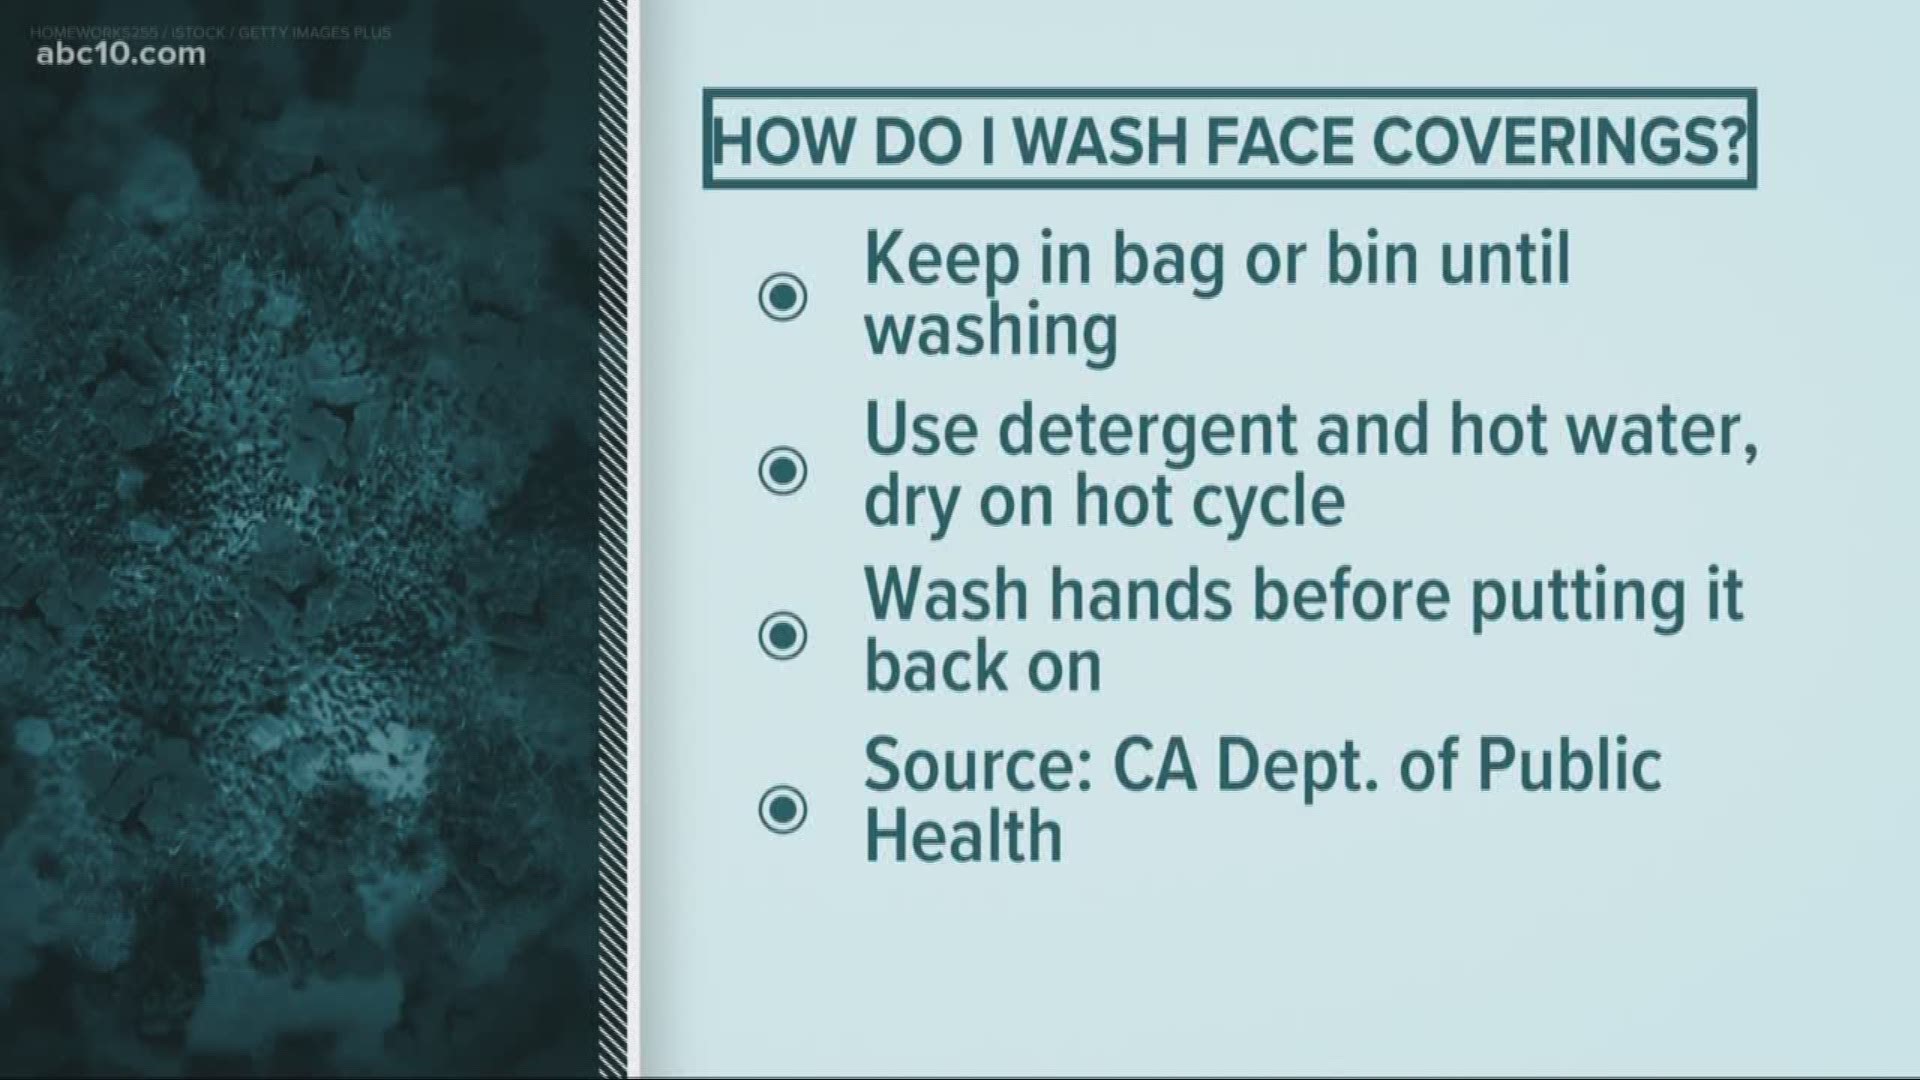 At ABC10, we're dedicated to answering your questions with facts, not fear during the coronavirus outbreak.